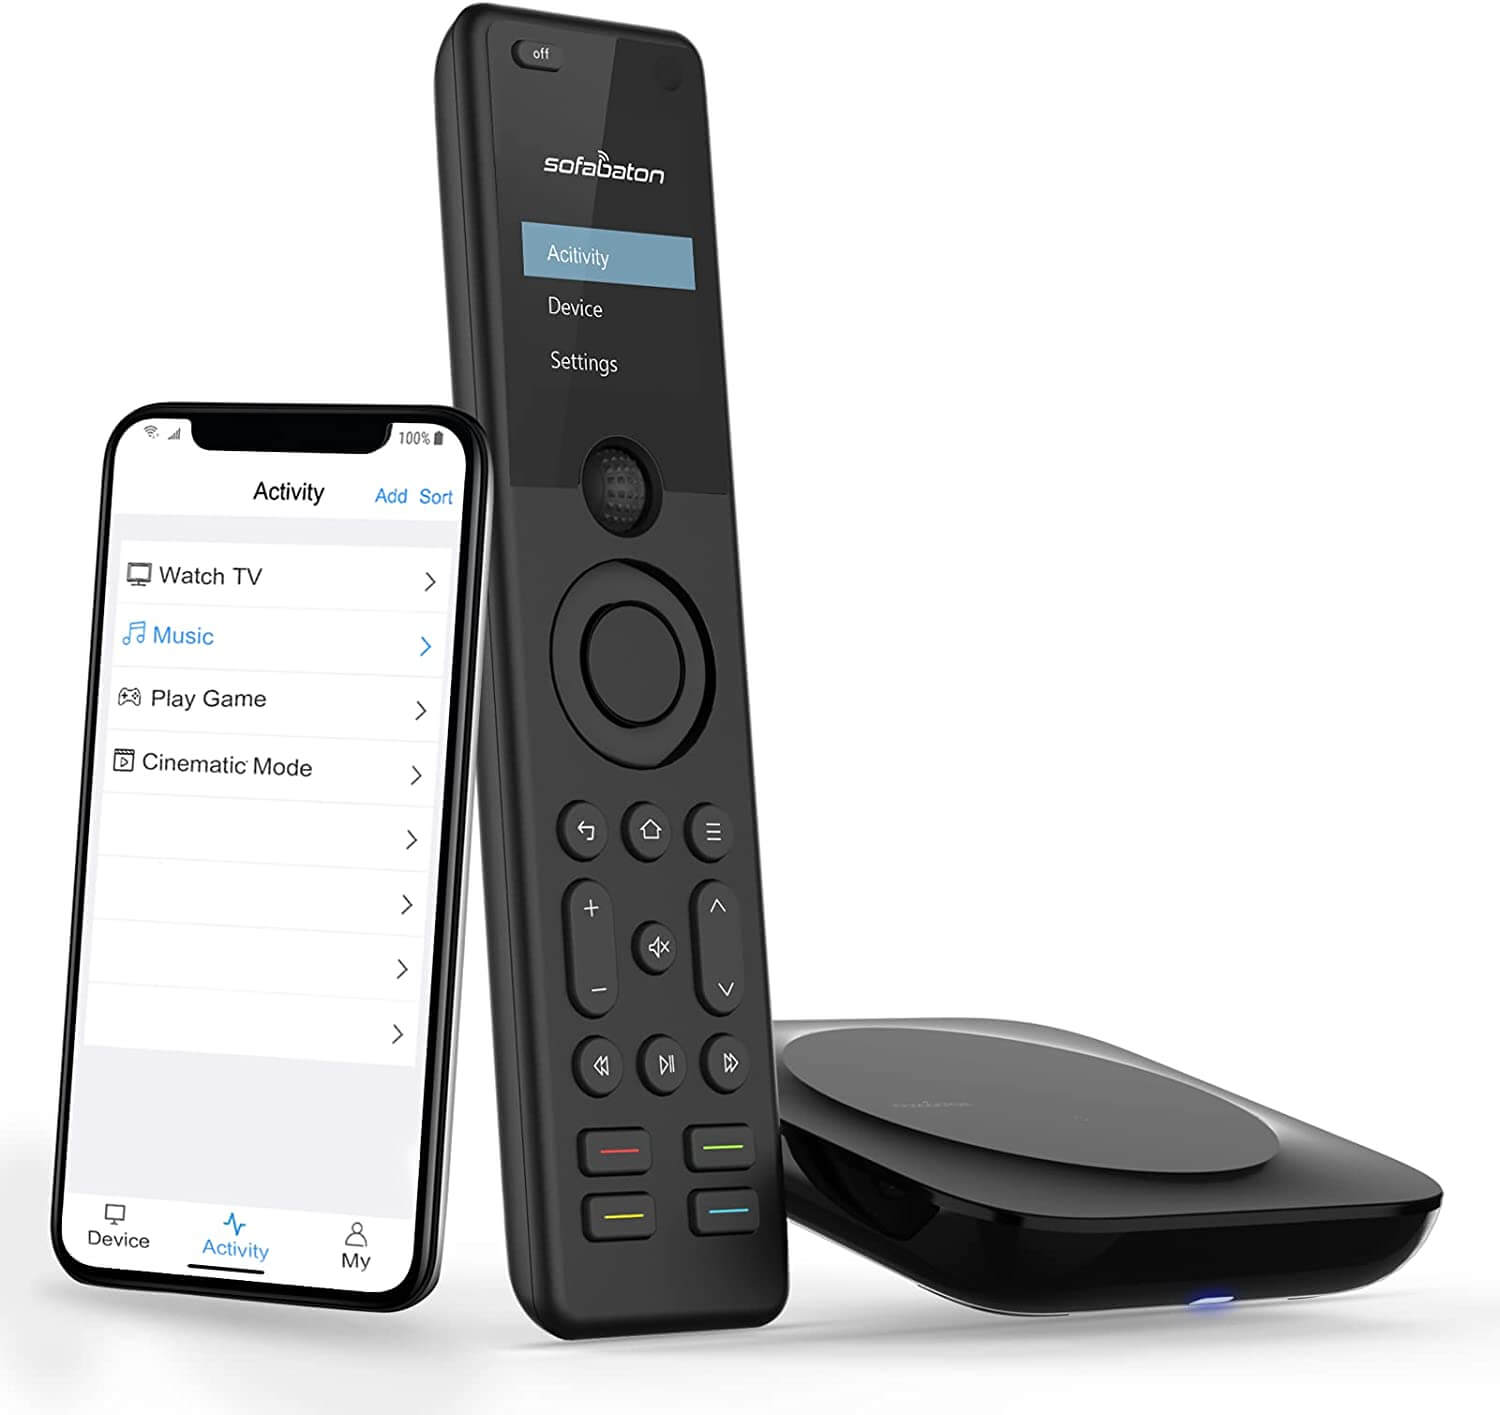 SofaBaton X1 - Best Remote for YouTube TV